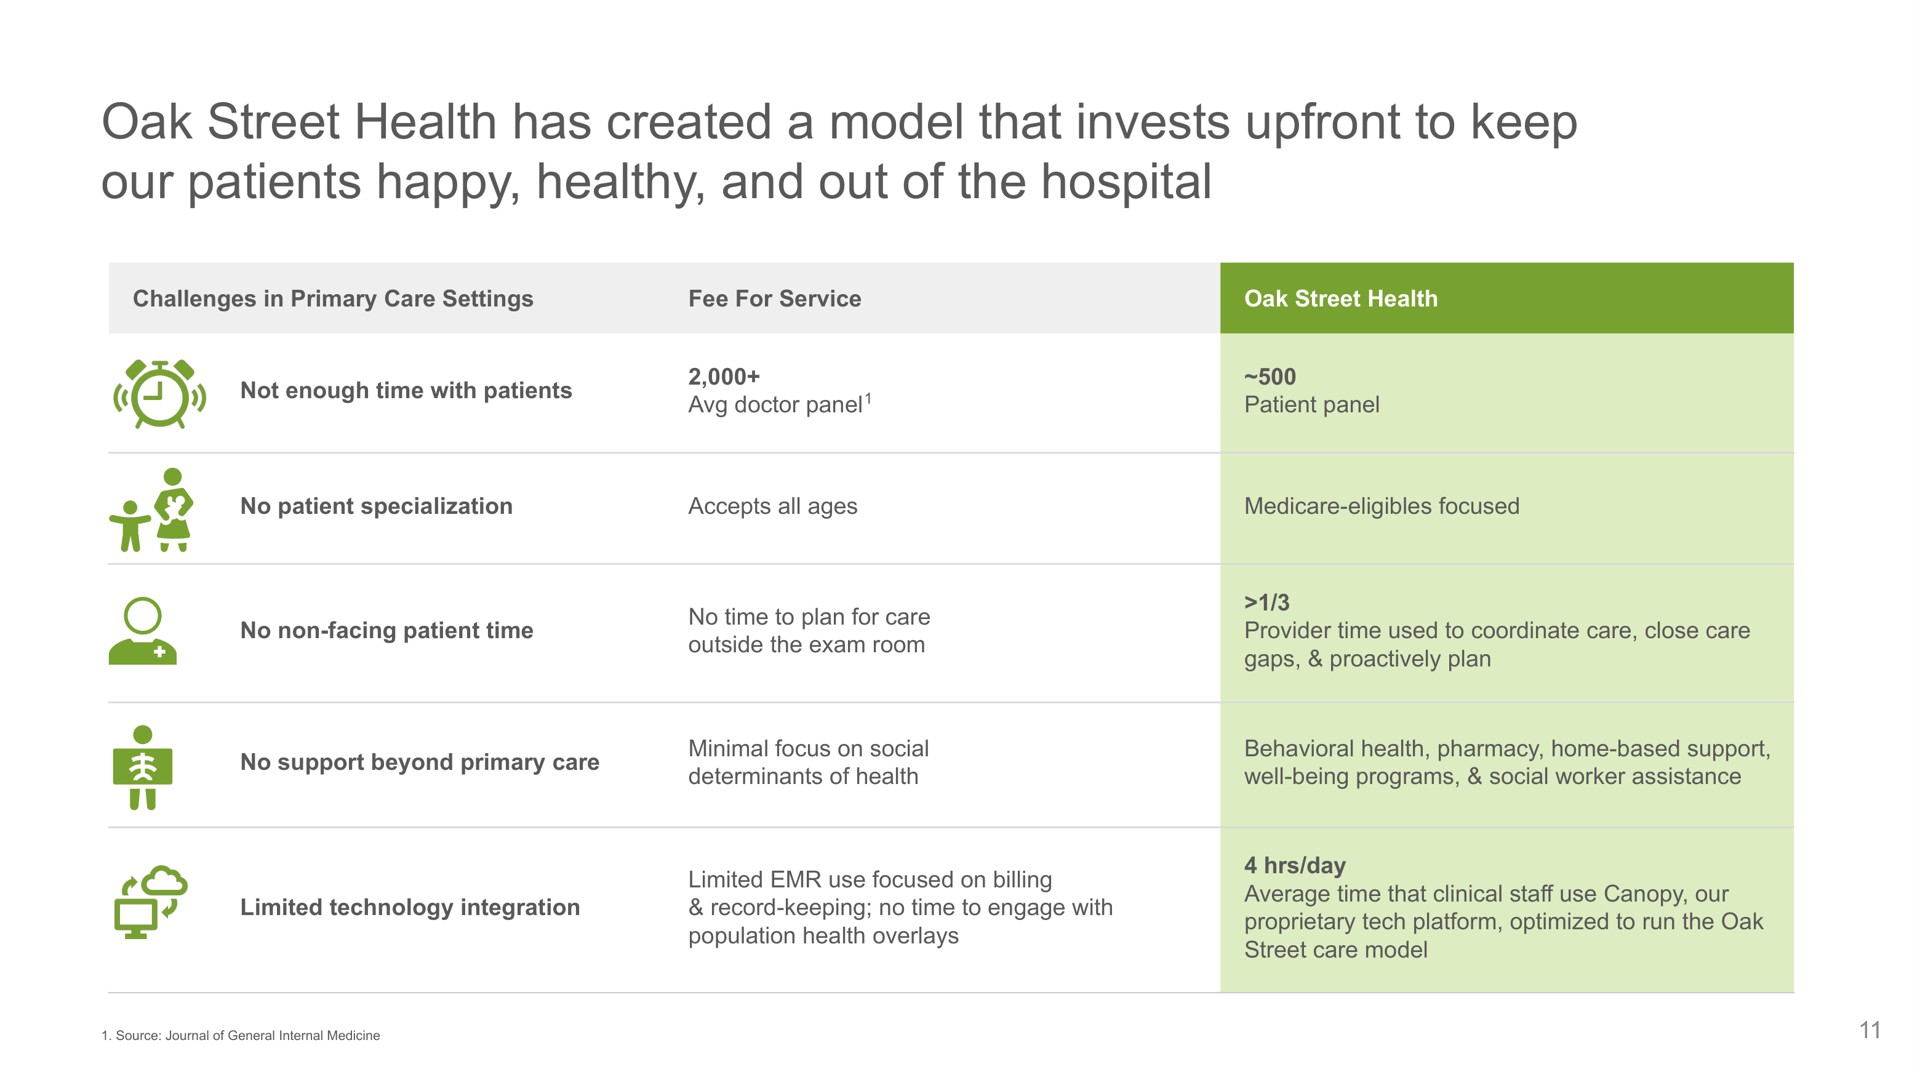 oak street health has created a model that invests to keep our patients happy healthy and out of the hospital | Oak Street Health